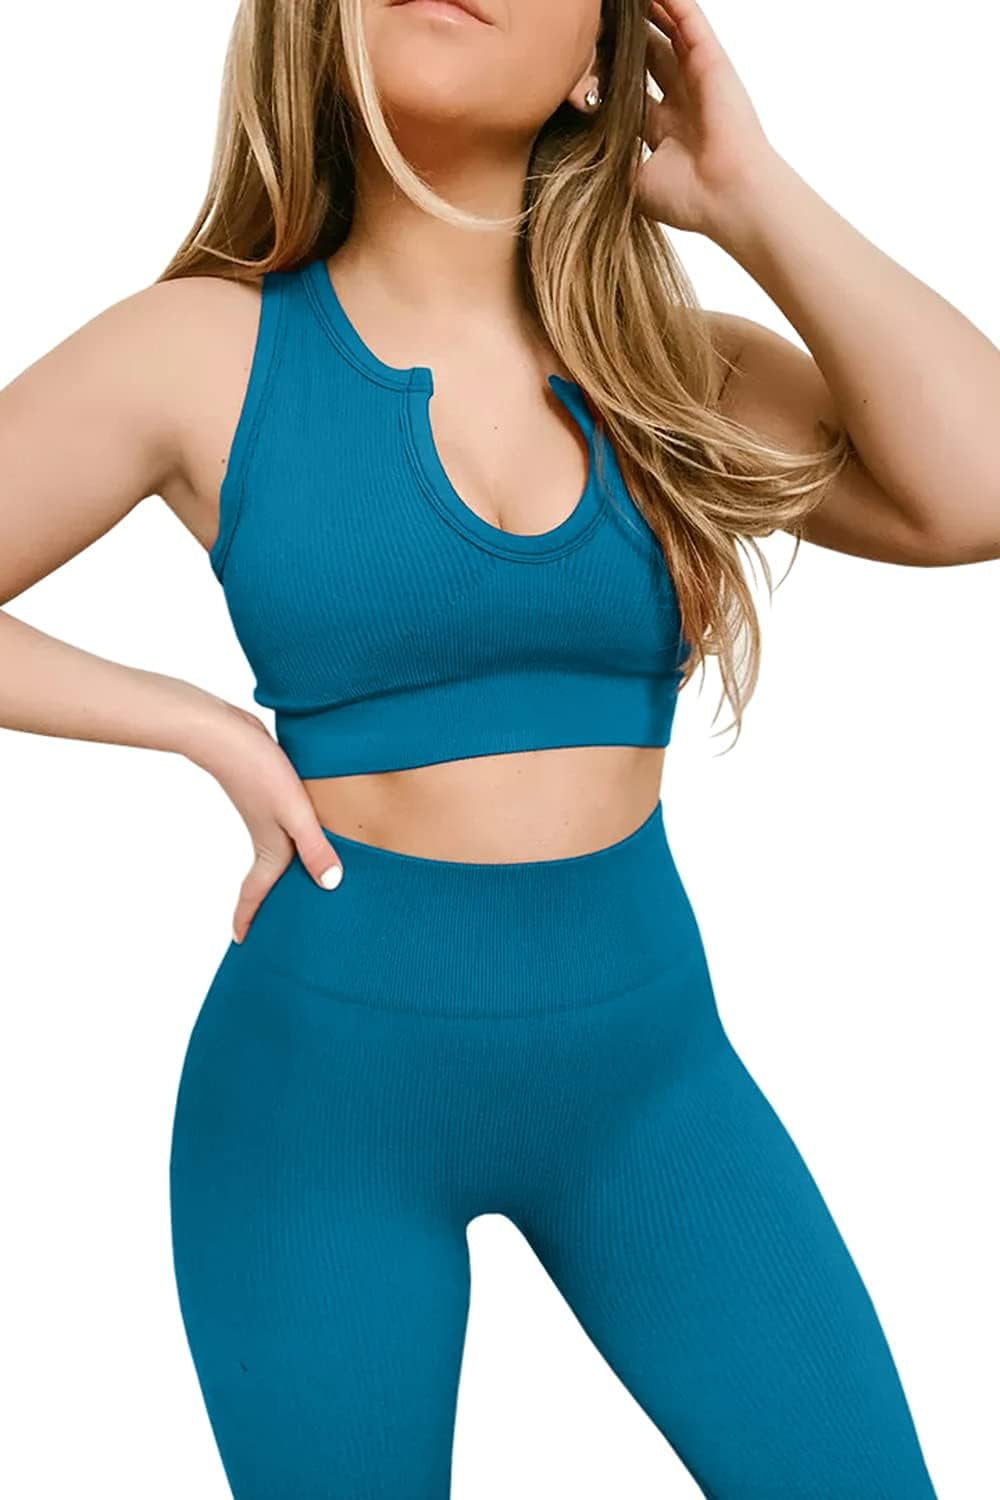 Professional title: "Women's High Waisted Leggings and Sports Bra Gym Set in Light Blue - Yoga Workout Outfit"